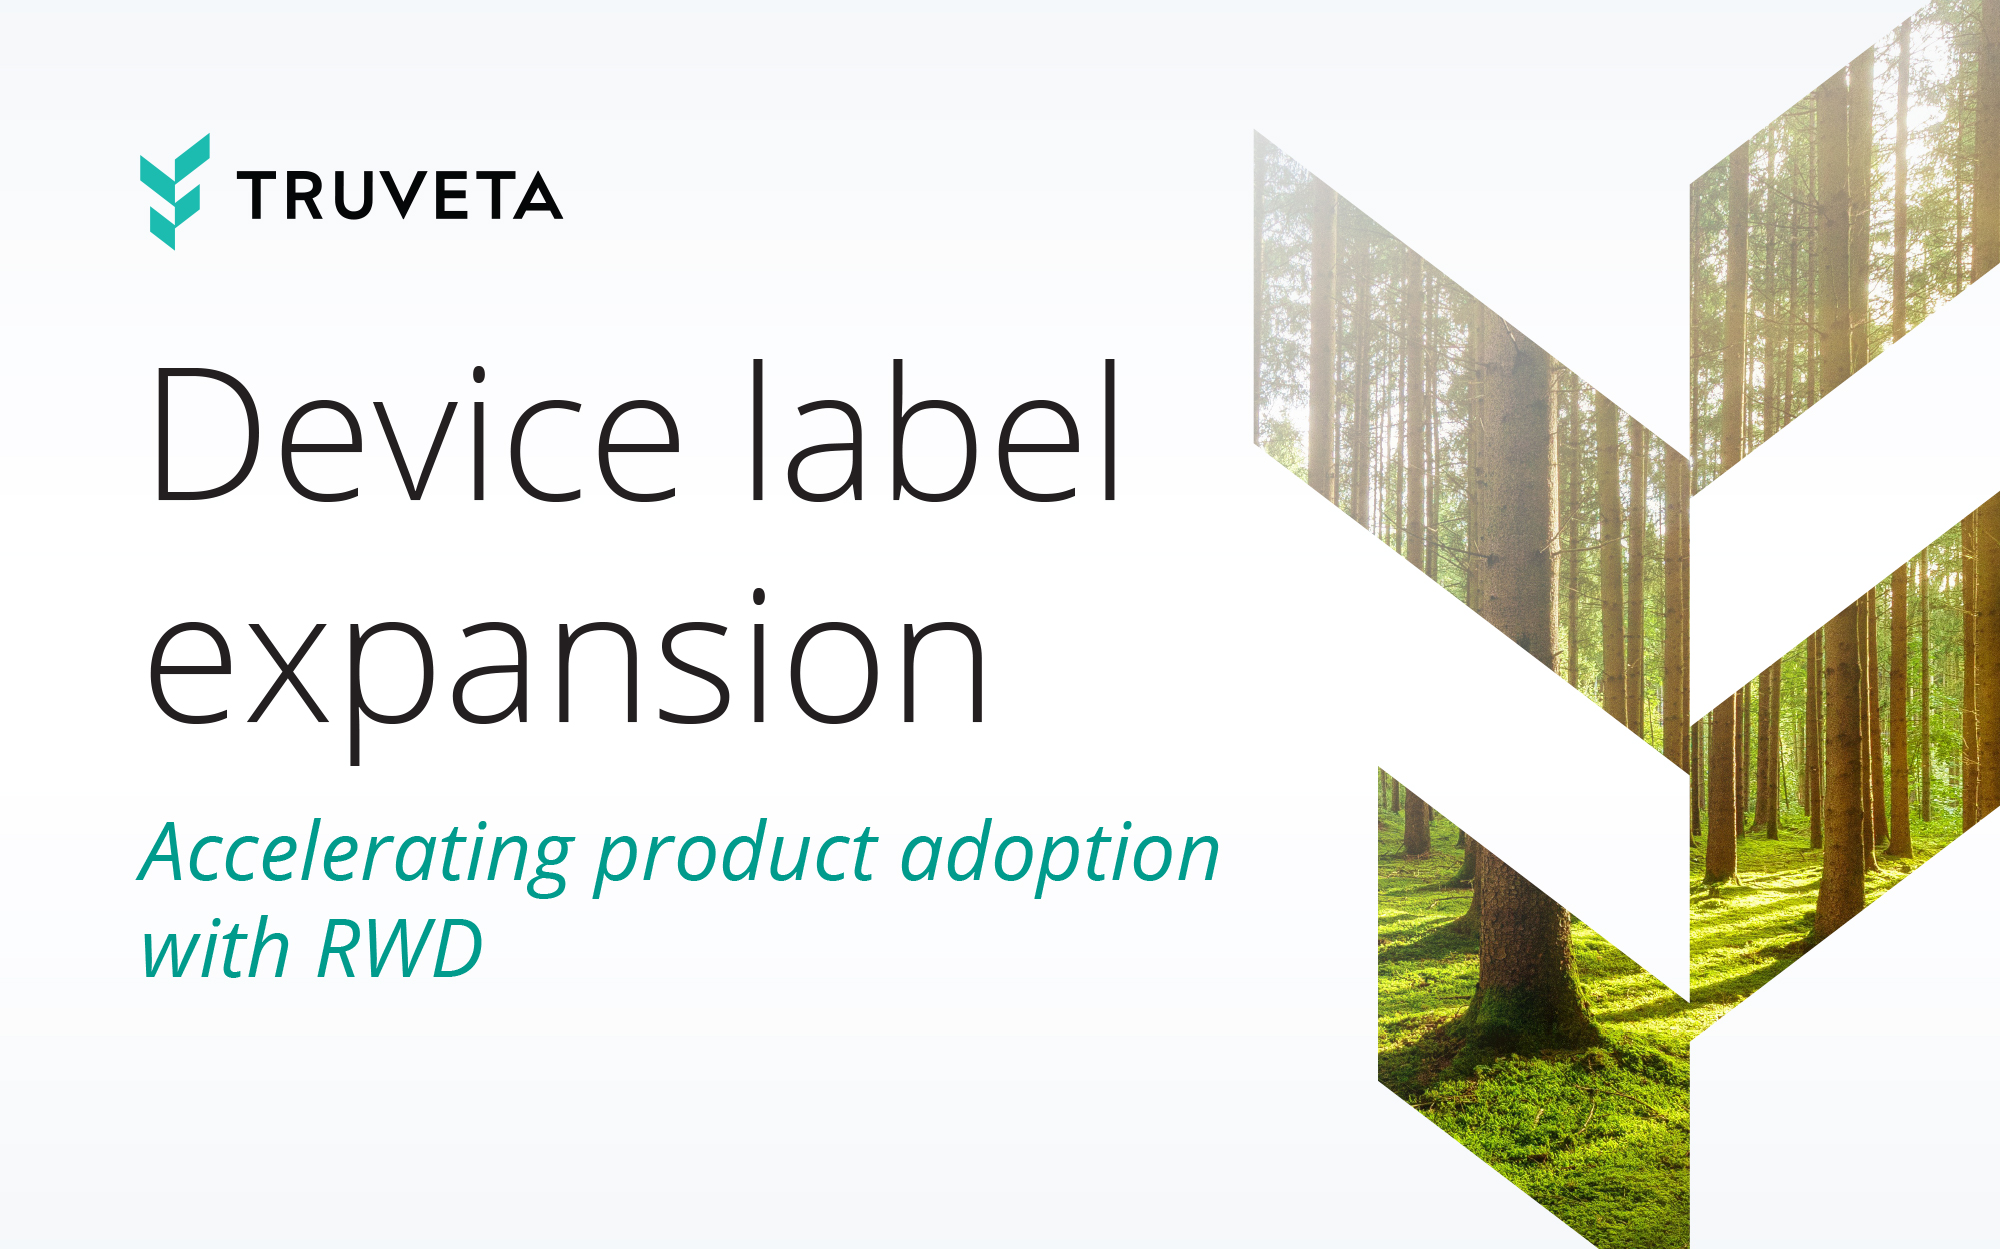 o Device label expansion is accelerated with the use of real-world data (RWD).